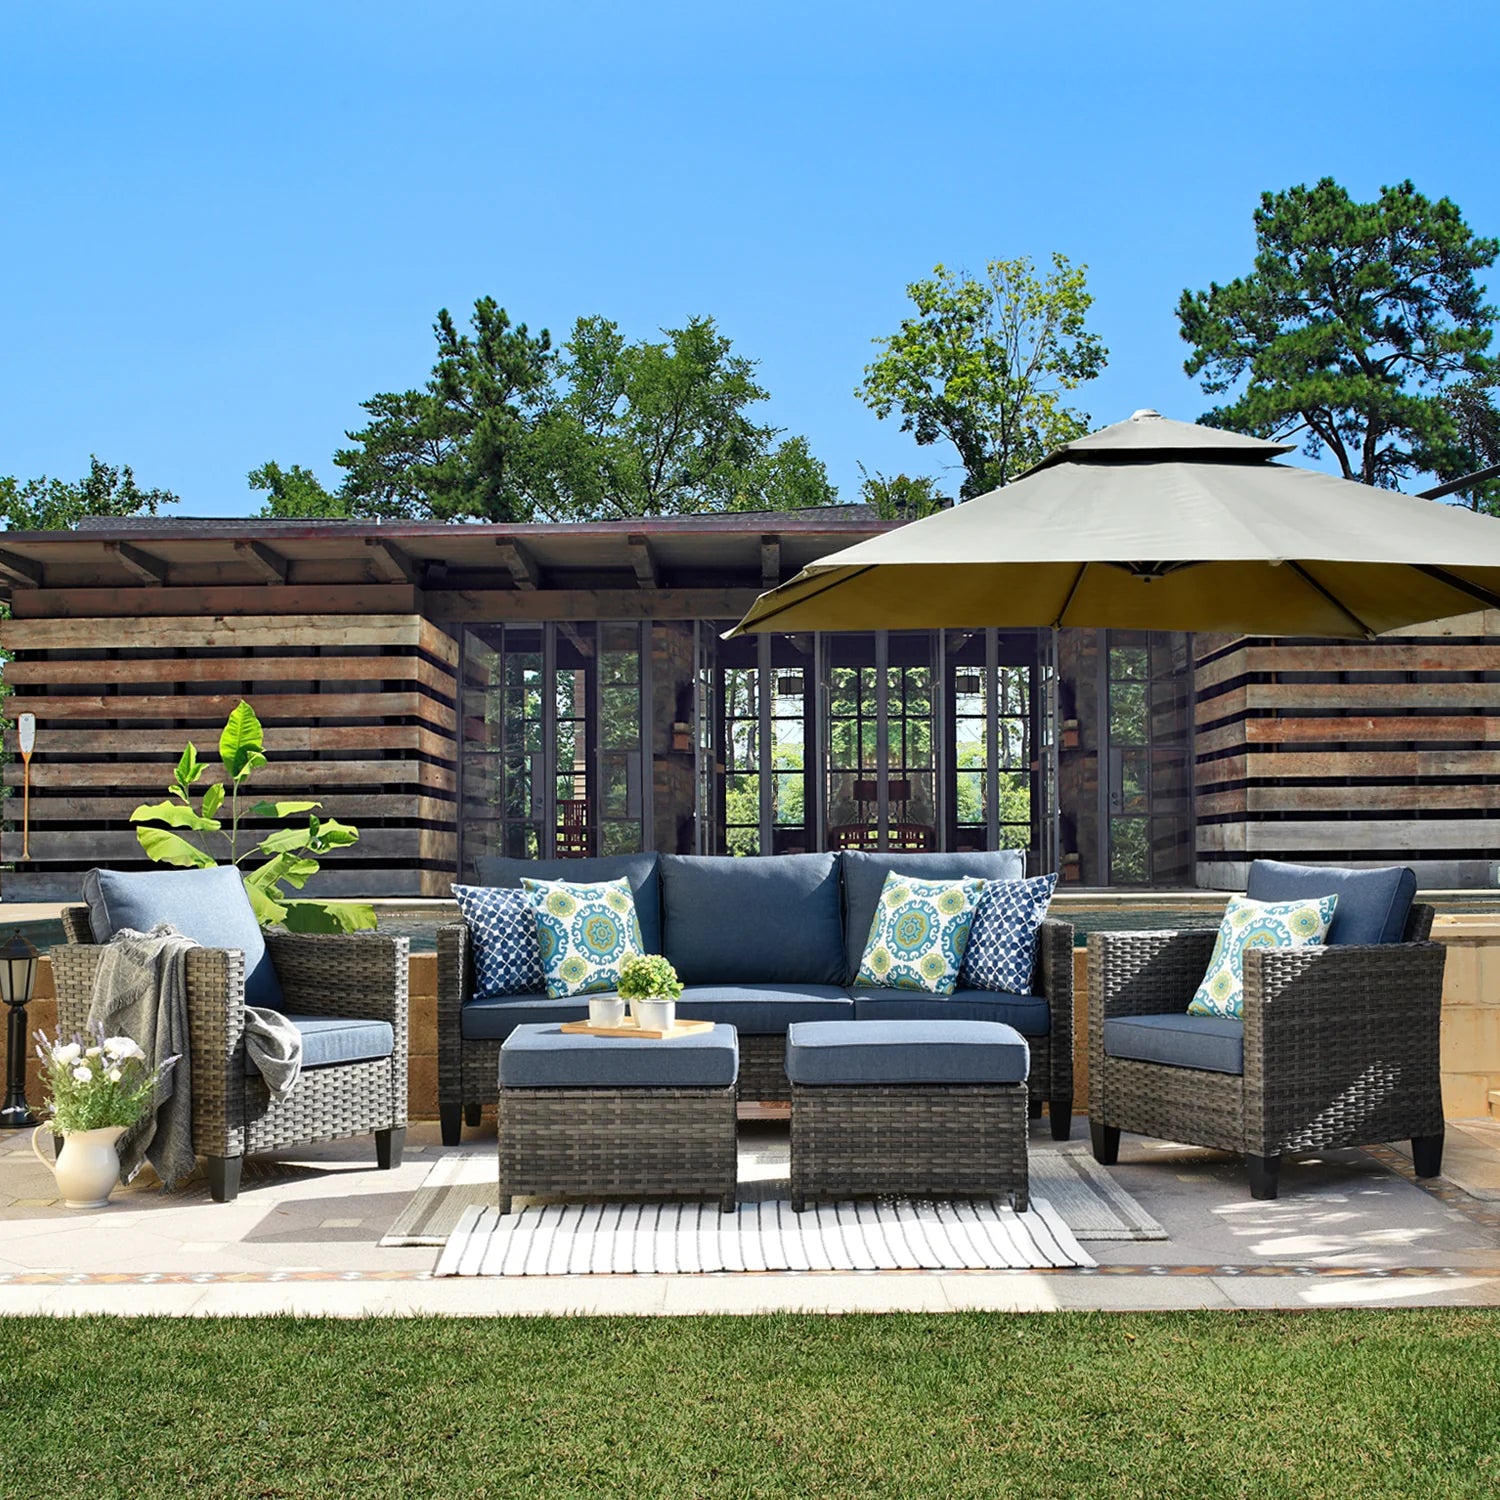 Transform Your Patio: Top 5 Simple Backyard Landscaping Upgrades